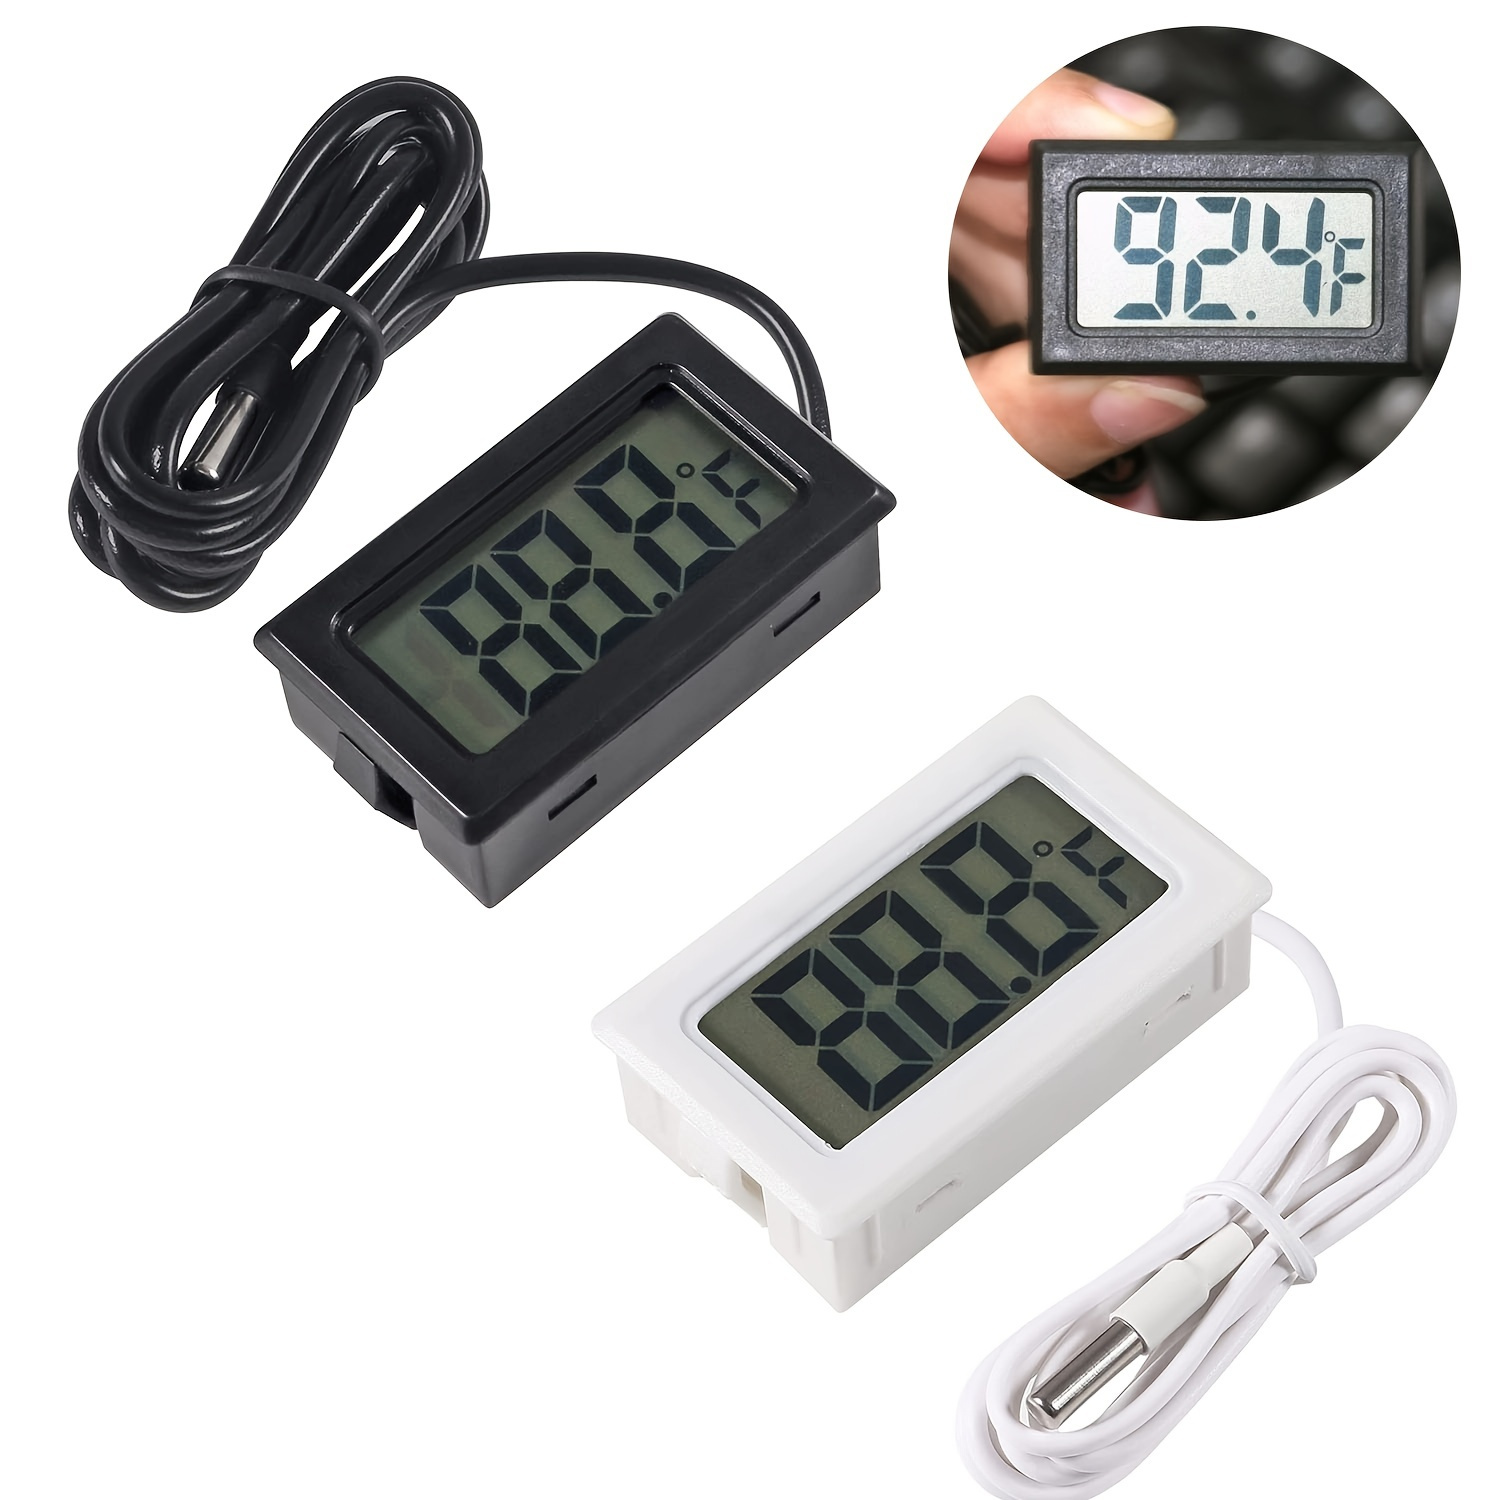 Digital Refrigerator Thermometer, LCD Display Thermostat, Oven Thermometer  Freezer Electronic Temperature Hygrometer With Probe For Car Fish Tank Aqua